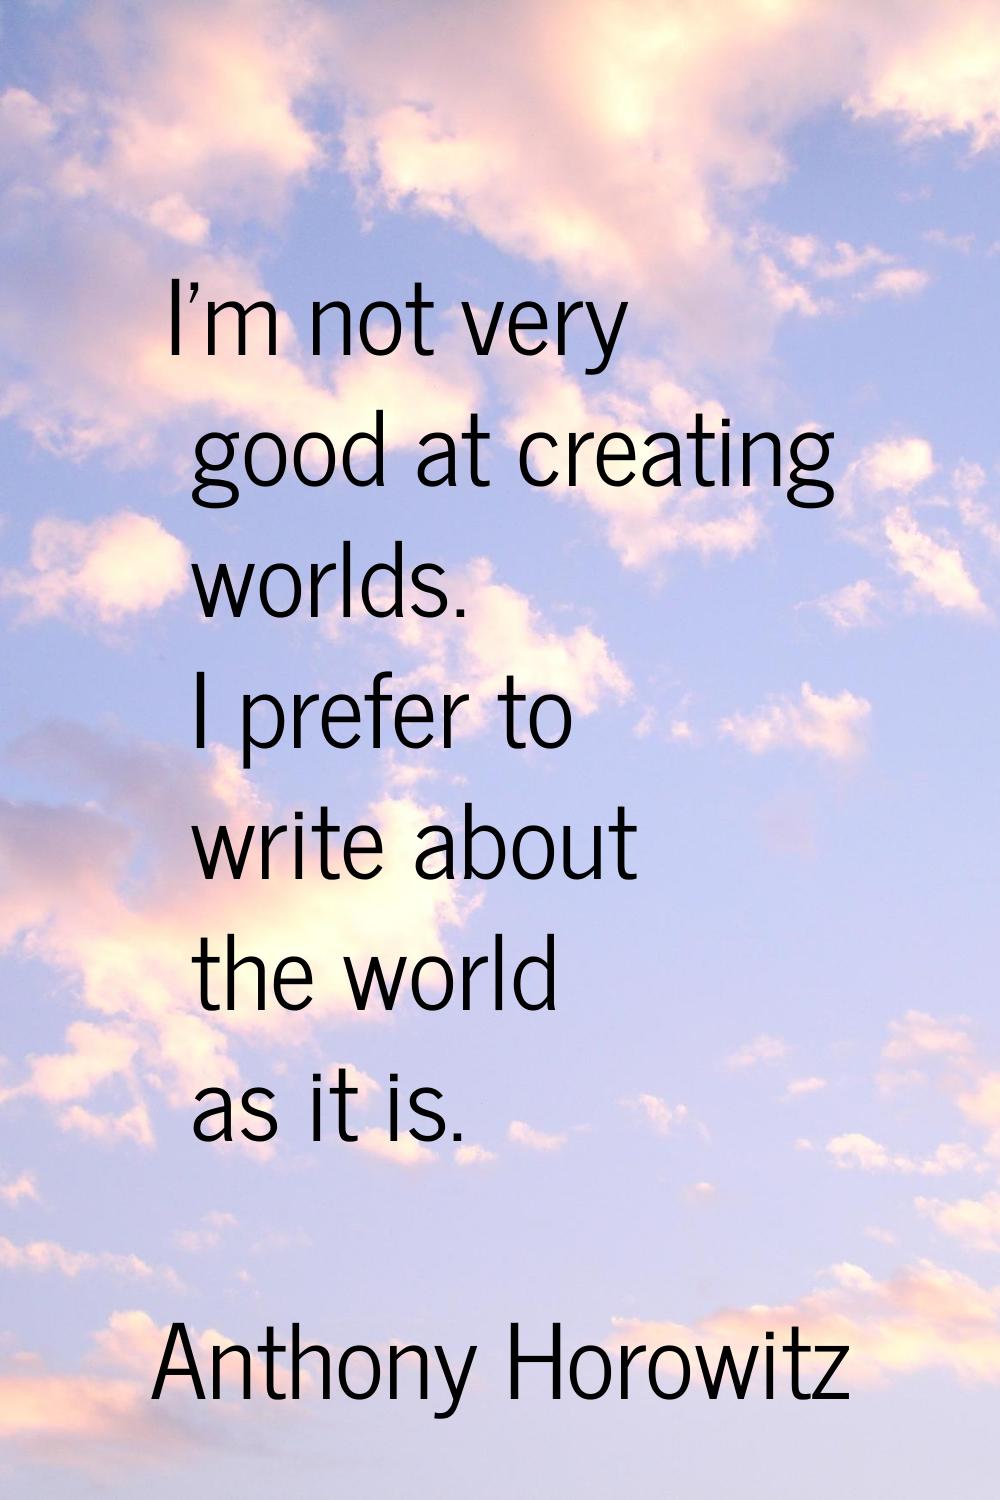 I'm not very good at creating worlds. I prefer to write about the world as it is.